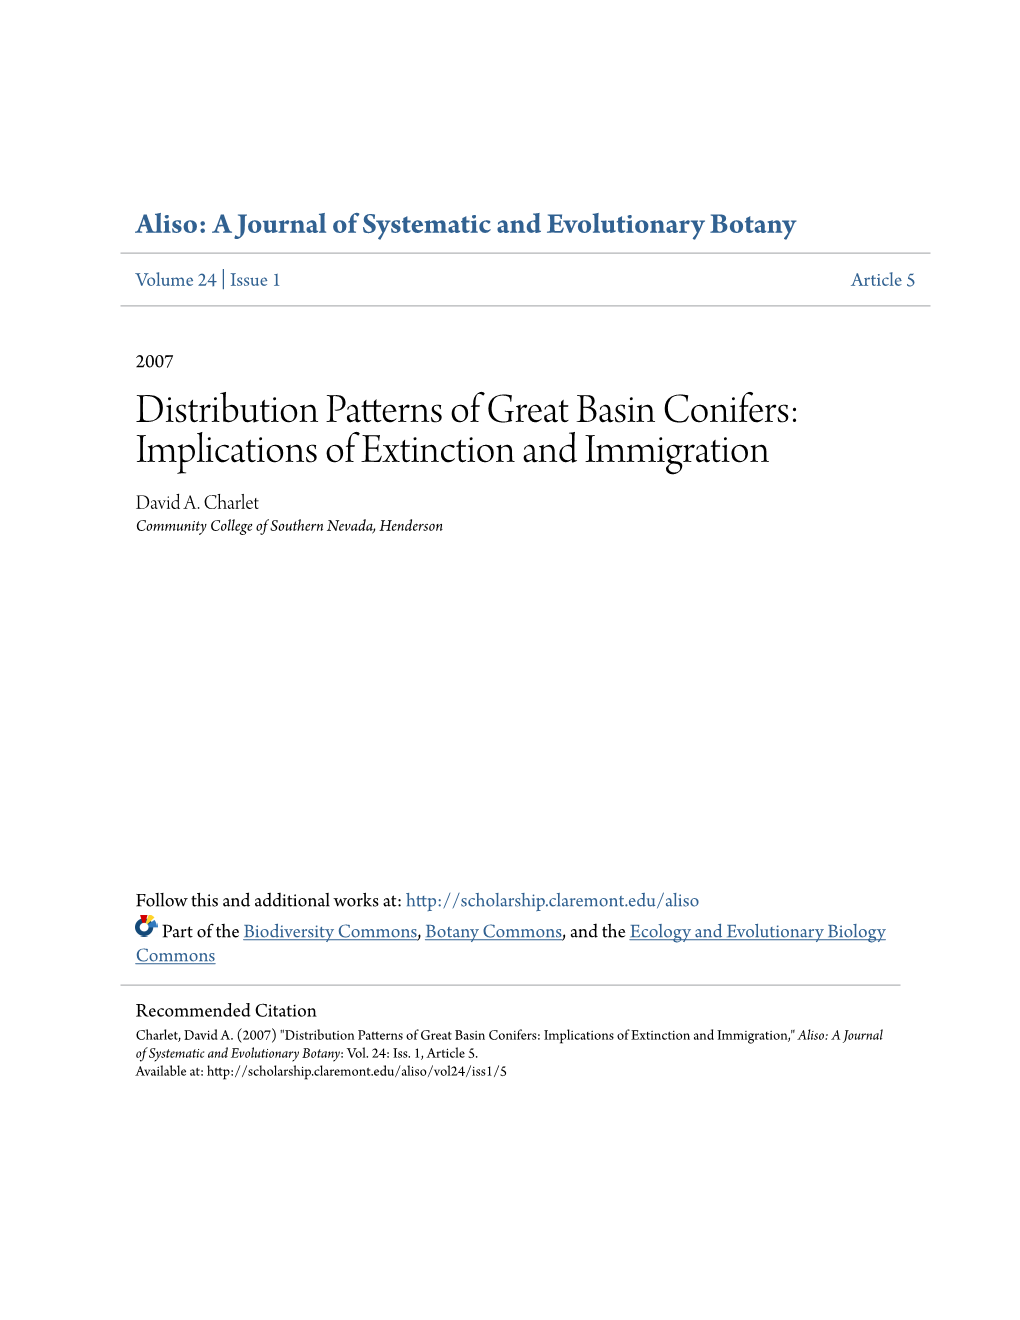 Distribution Patterns of Great Basin Conifers: Implications of Extinction and Immigration David A